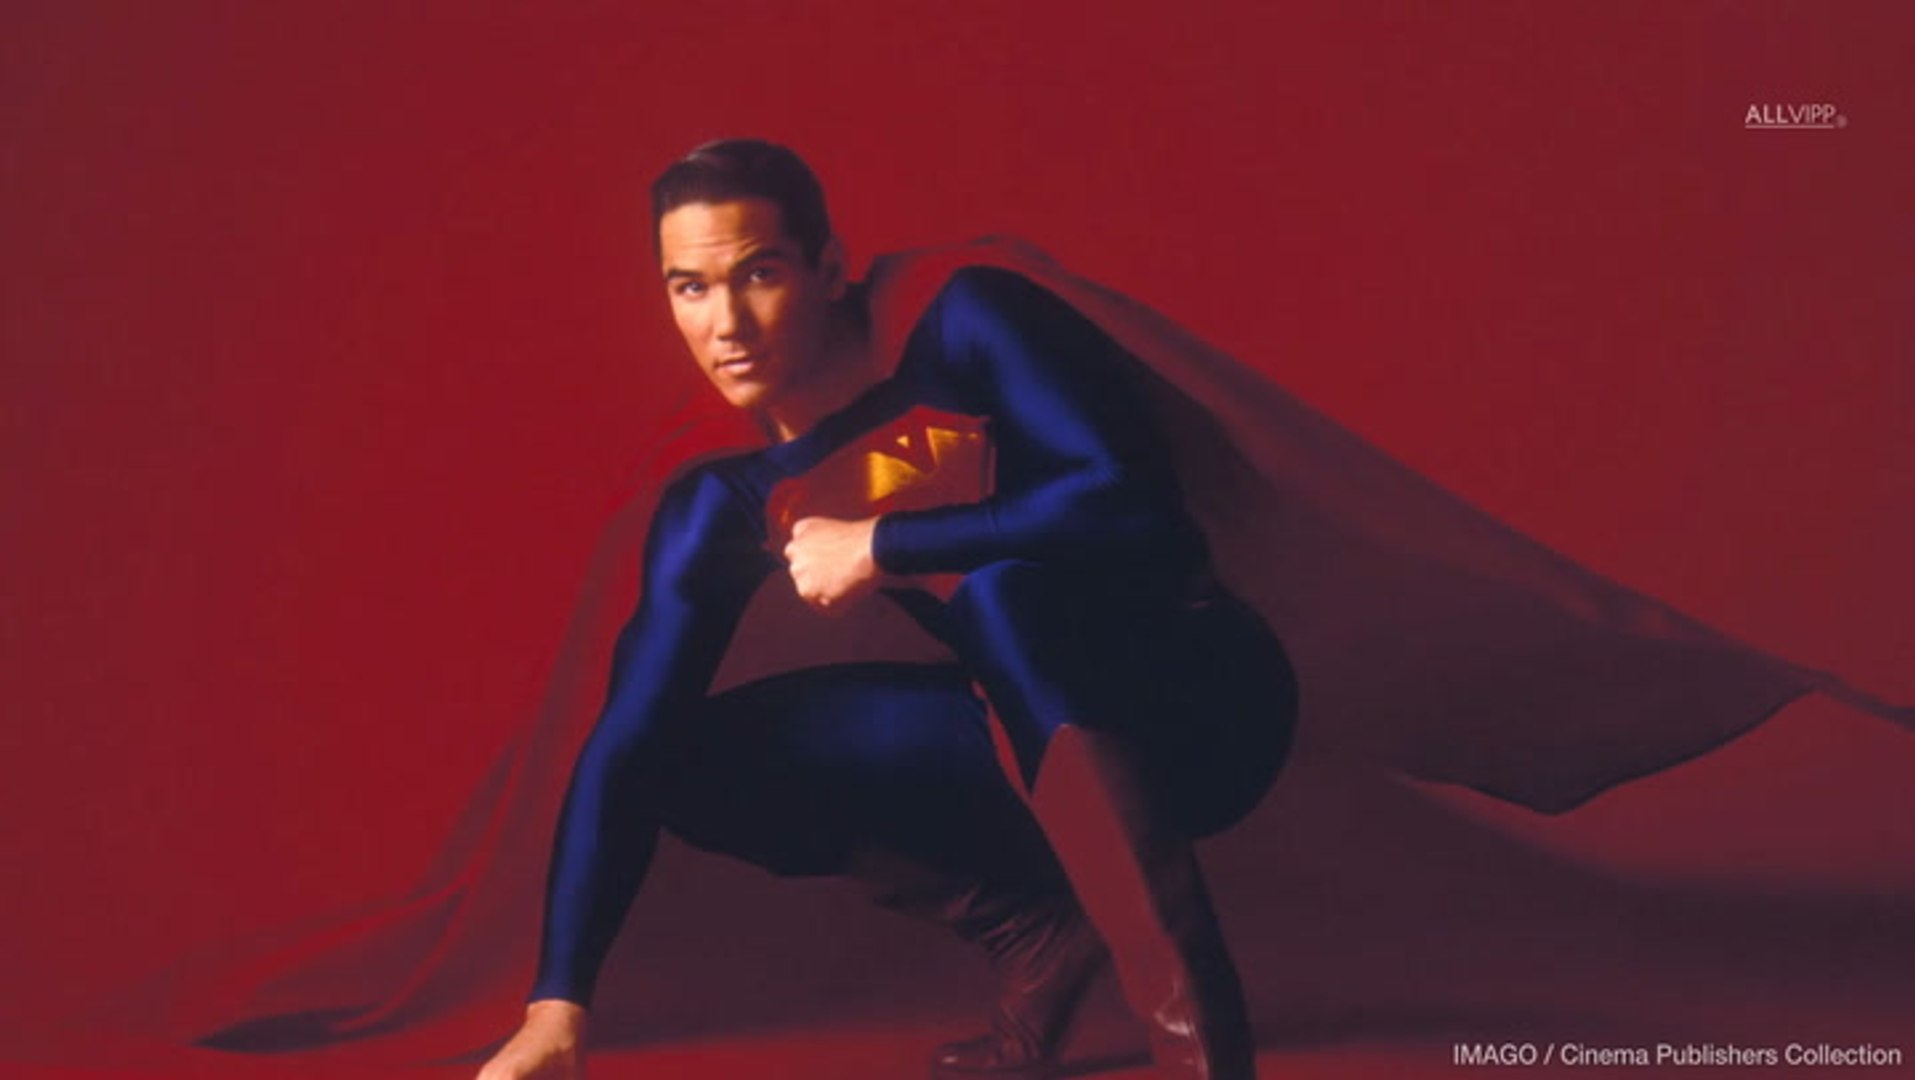 The latest Dean Cain videos on Dailymotion